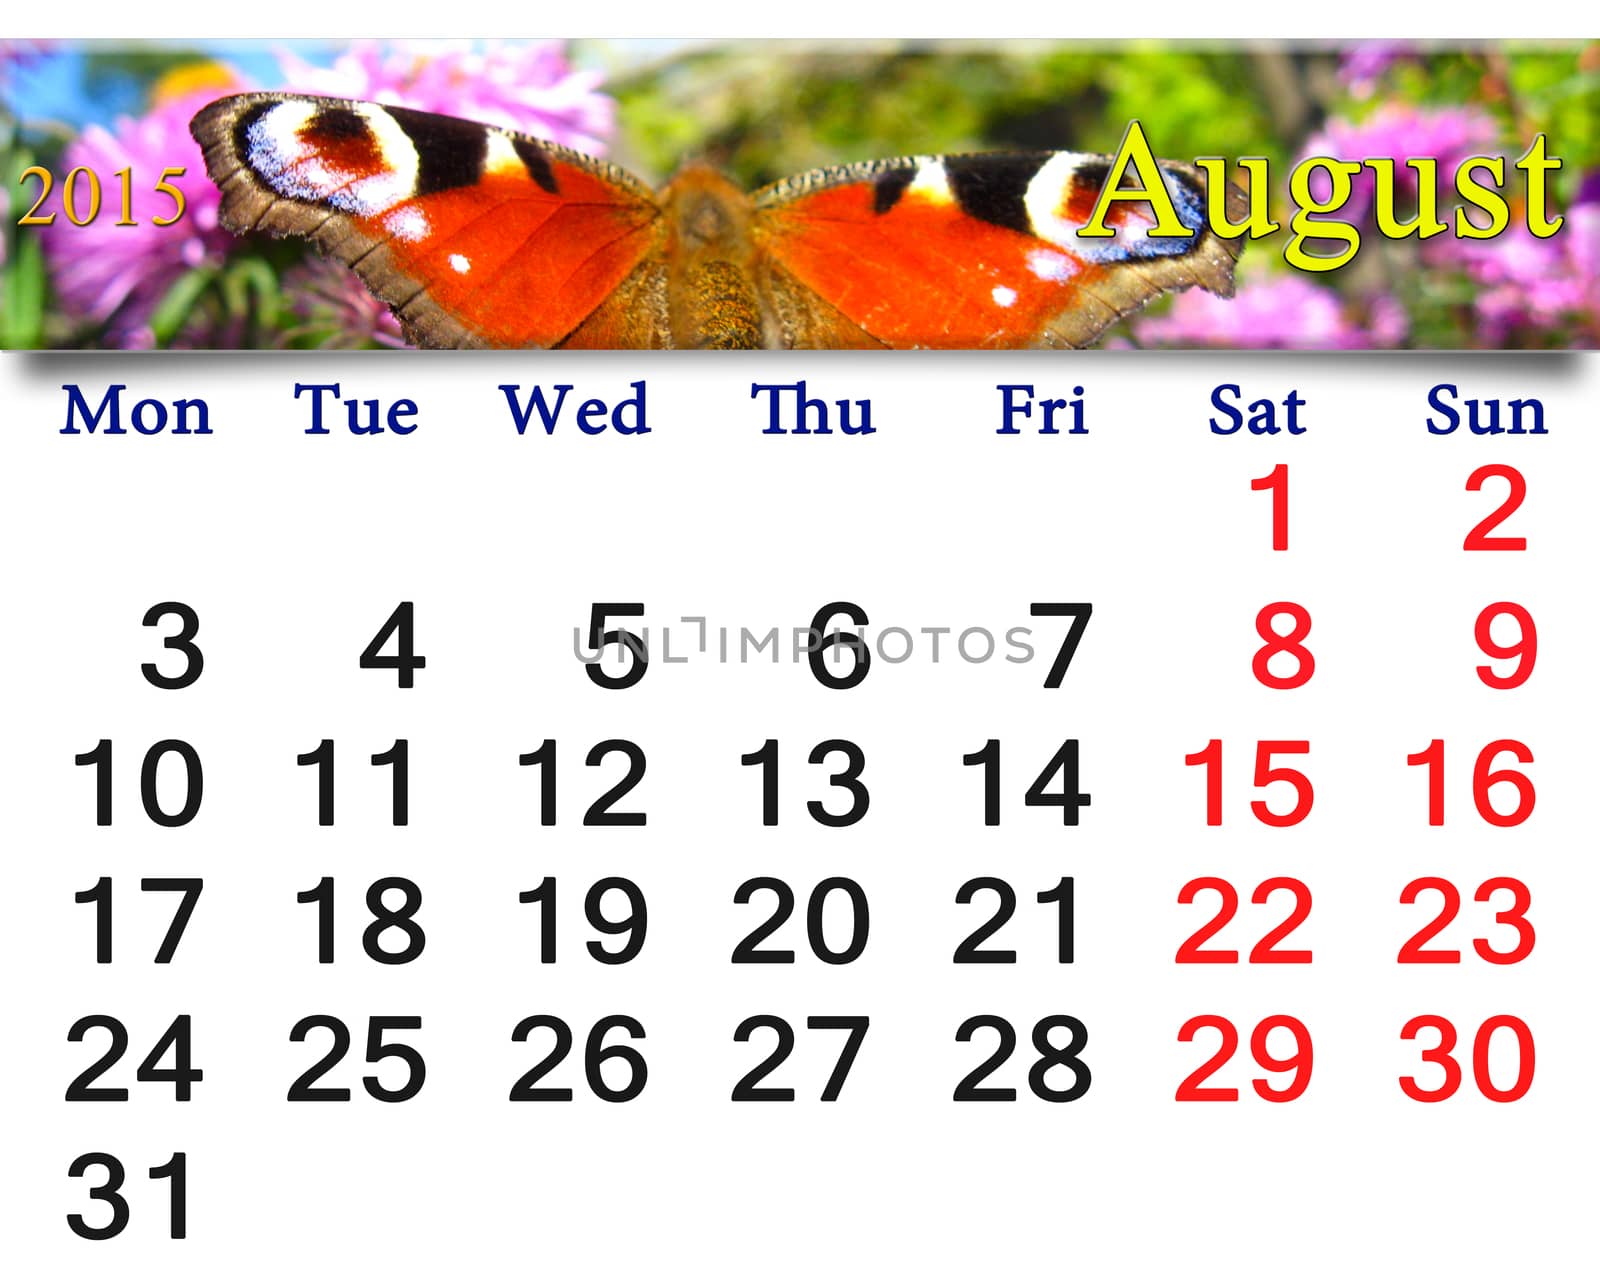 calendar for August of 2015 year with peacock eye by alexmak